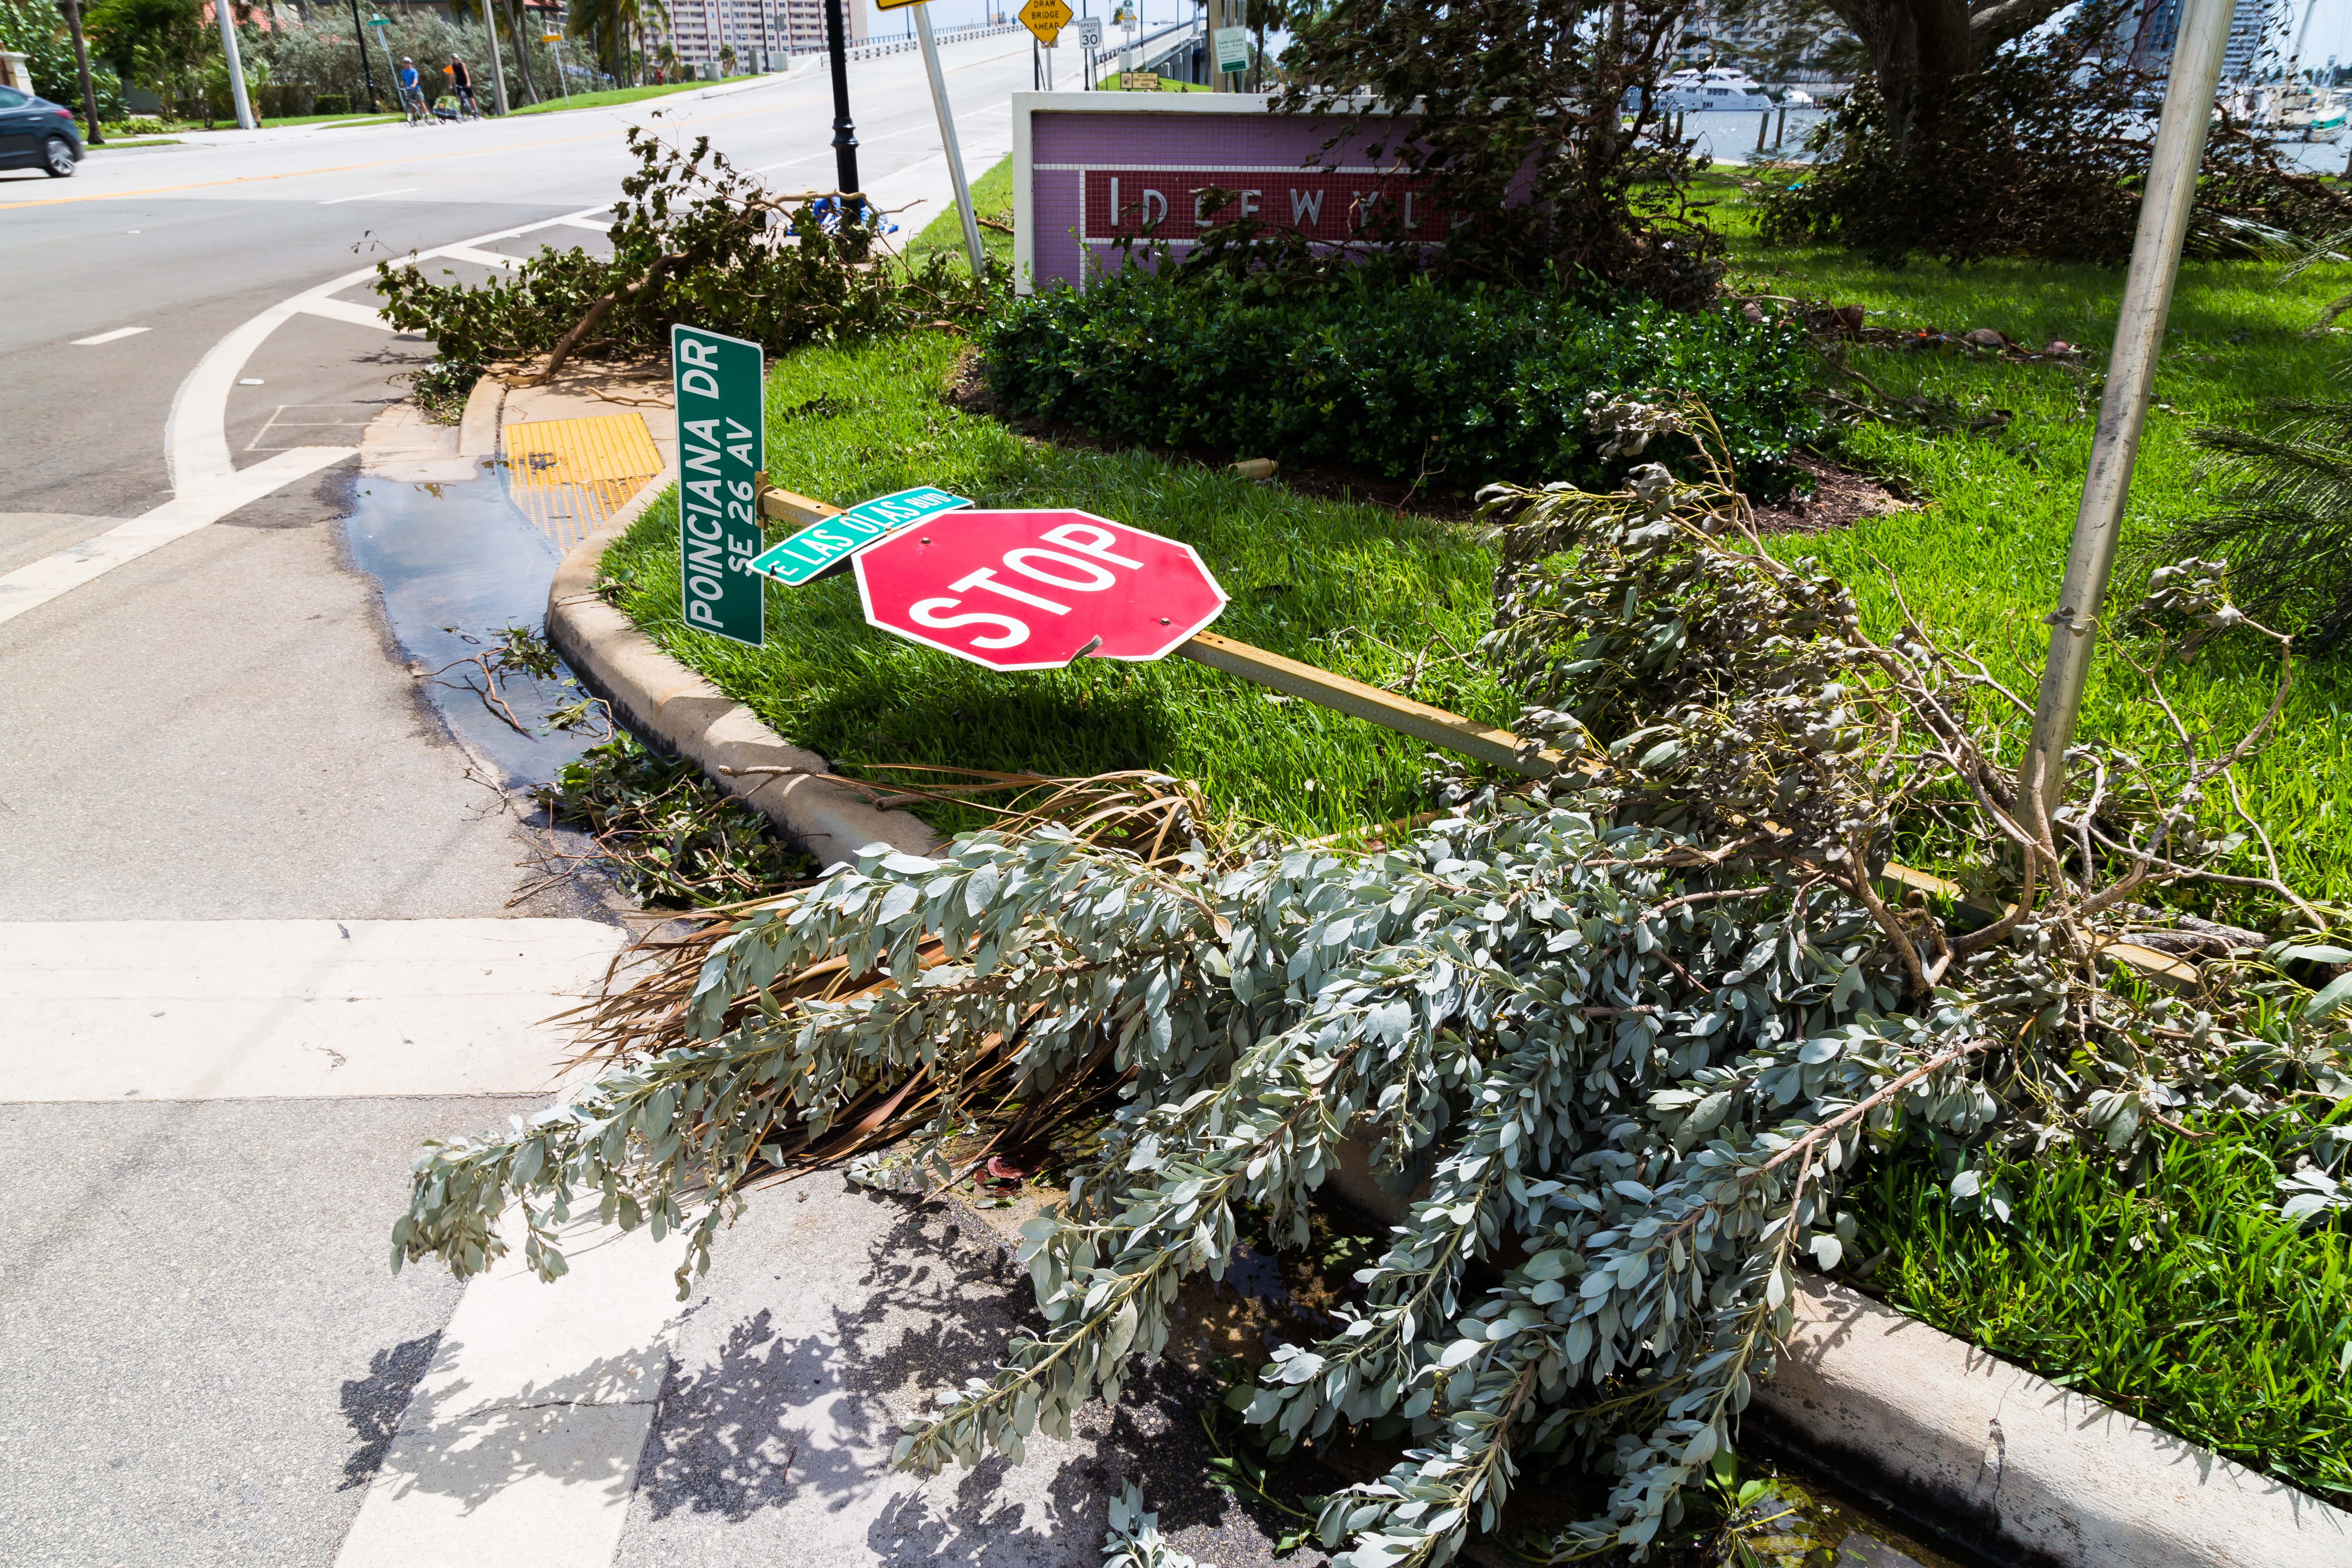 an image of a fallen tree and a knocked over stop sign